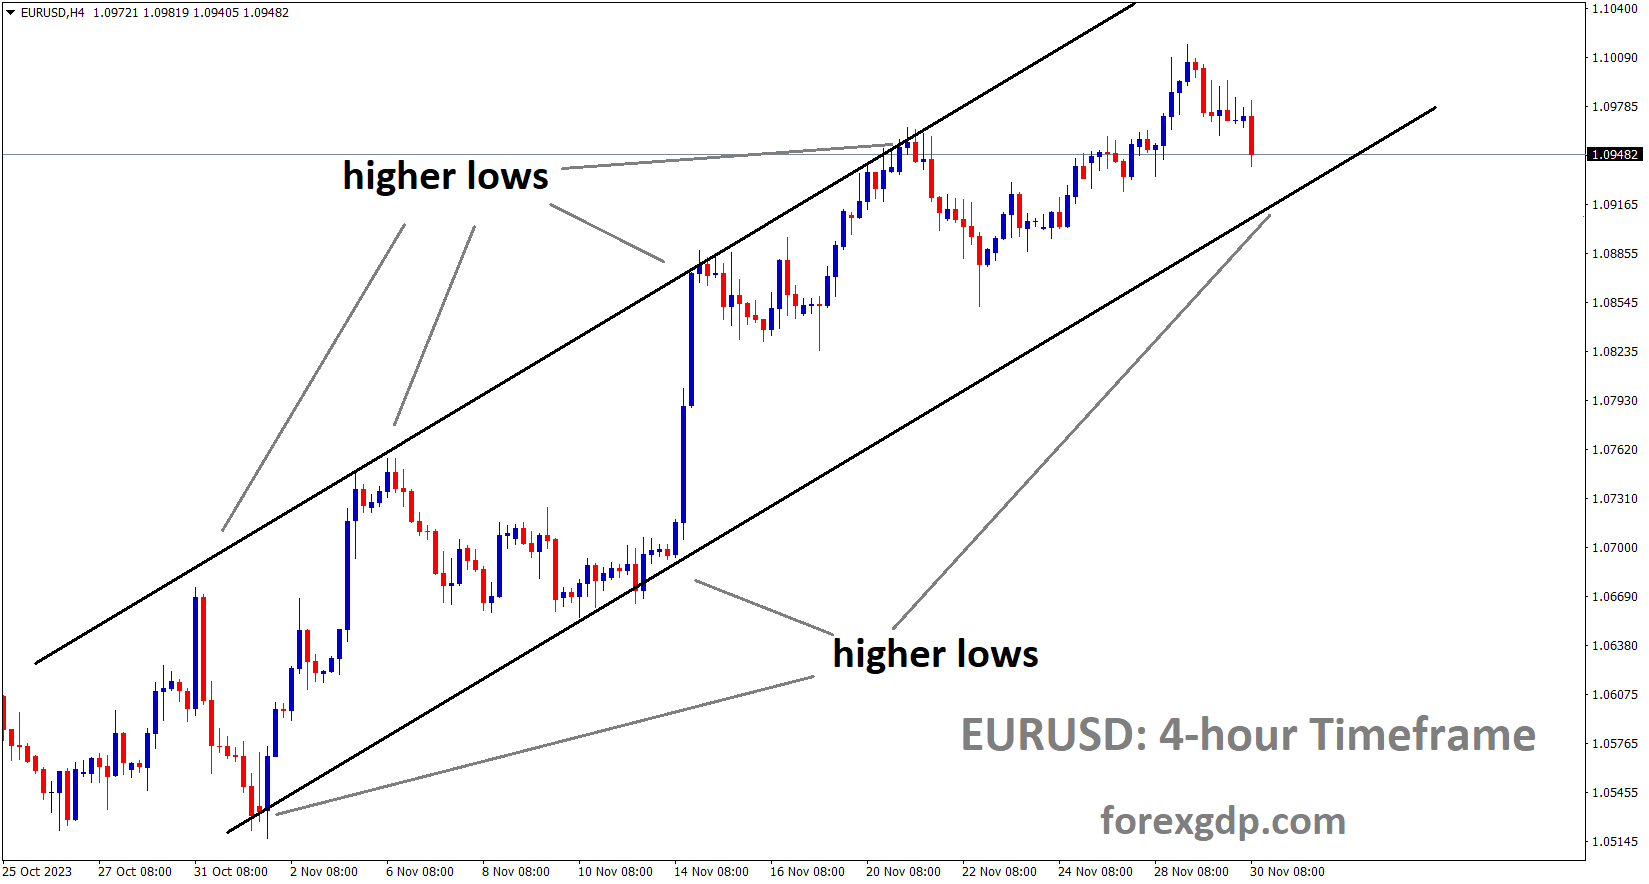 EURUSD is moving in an Ascending channel and the market has reached the higher low area of the channel